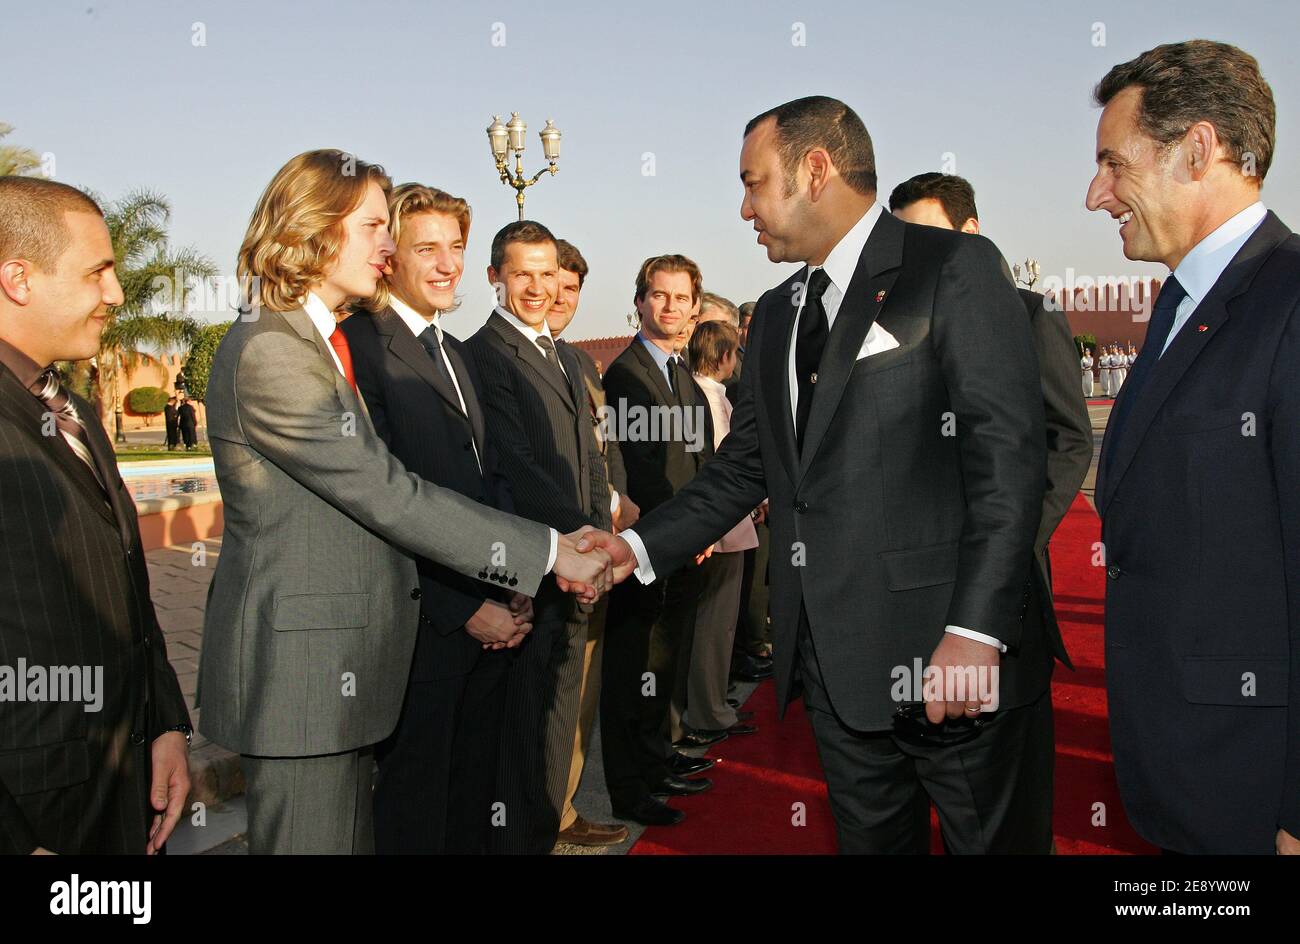 Morocco's King Mohammed VI greets French president Nicolas Sarkozy's sons Jean and Pierre next to singer Faudel and Nicolas Sarkozy during a welcome ceremony at the Marrakech airport, Morocco, on October 22, 2007, on the first day of a 3-Day state visit to Morocco Kingdom. Photo by Christophe Guibbaud/ABACAPRESS.COM Stock Photo